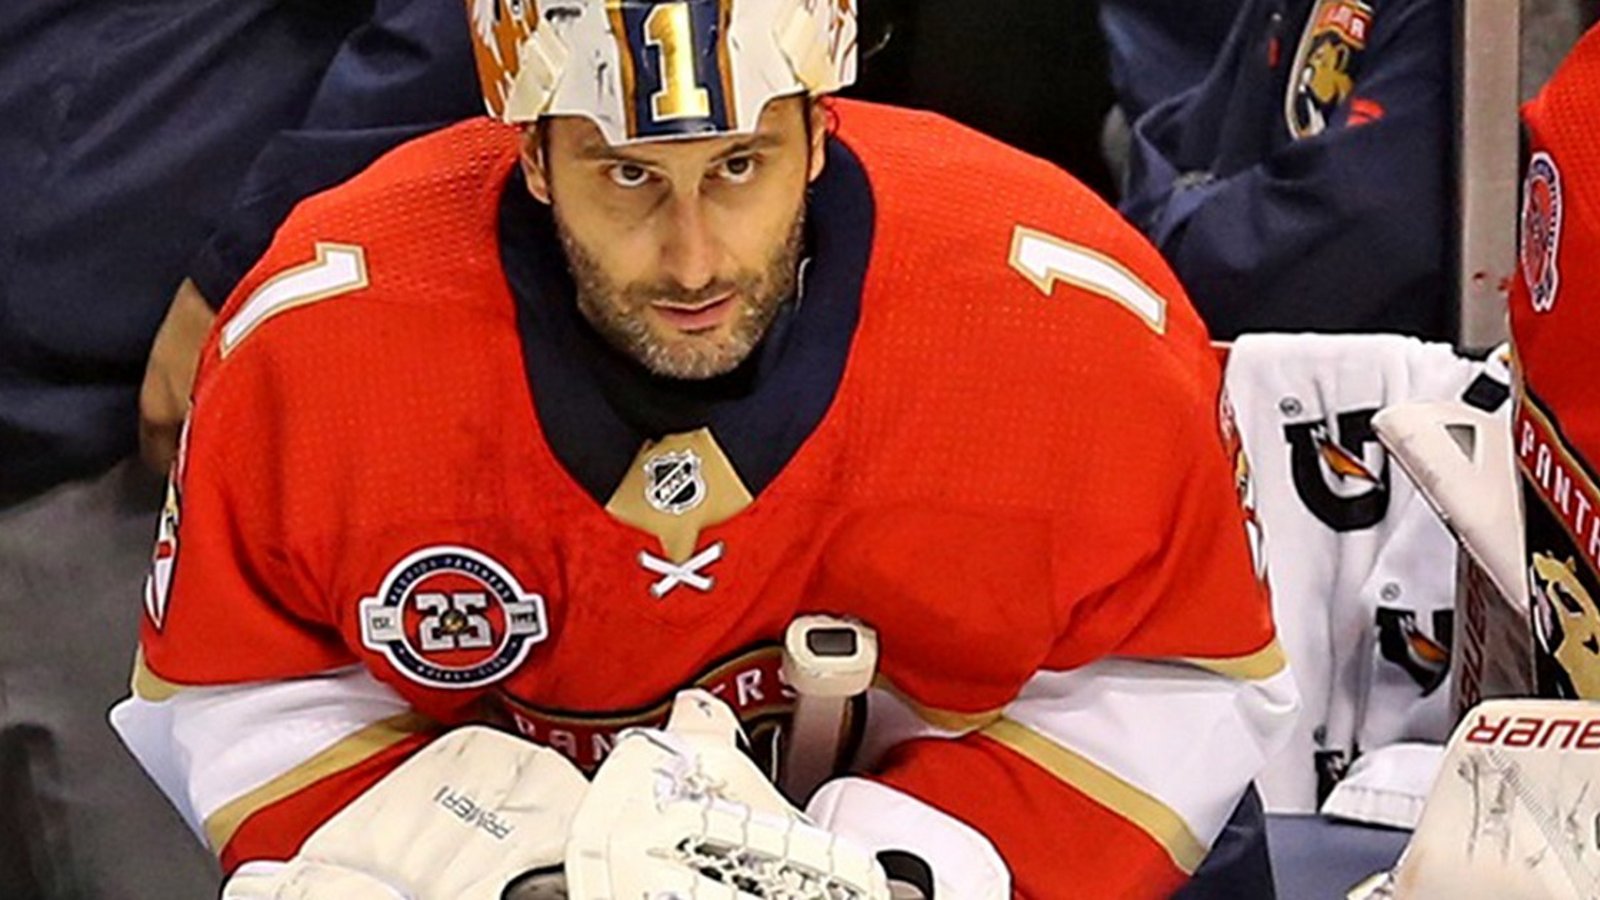 Roberto Luongo's career may be over. (Not April Fools)